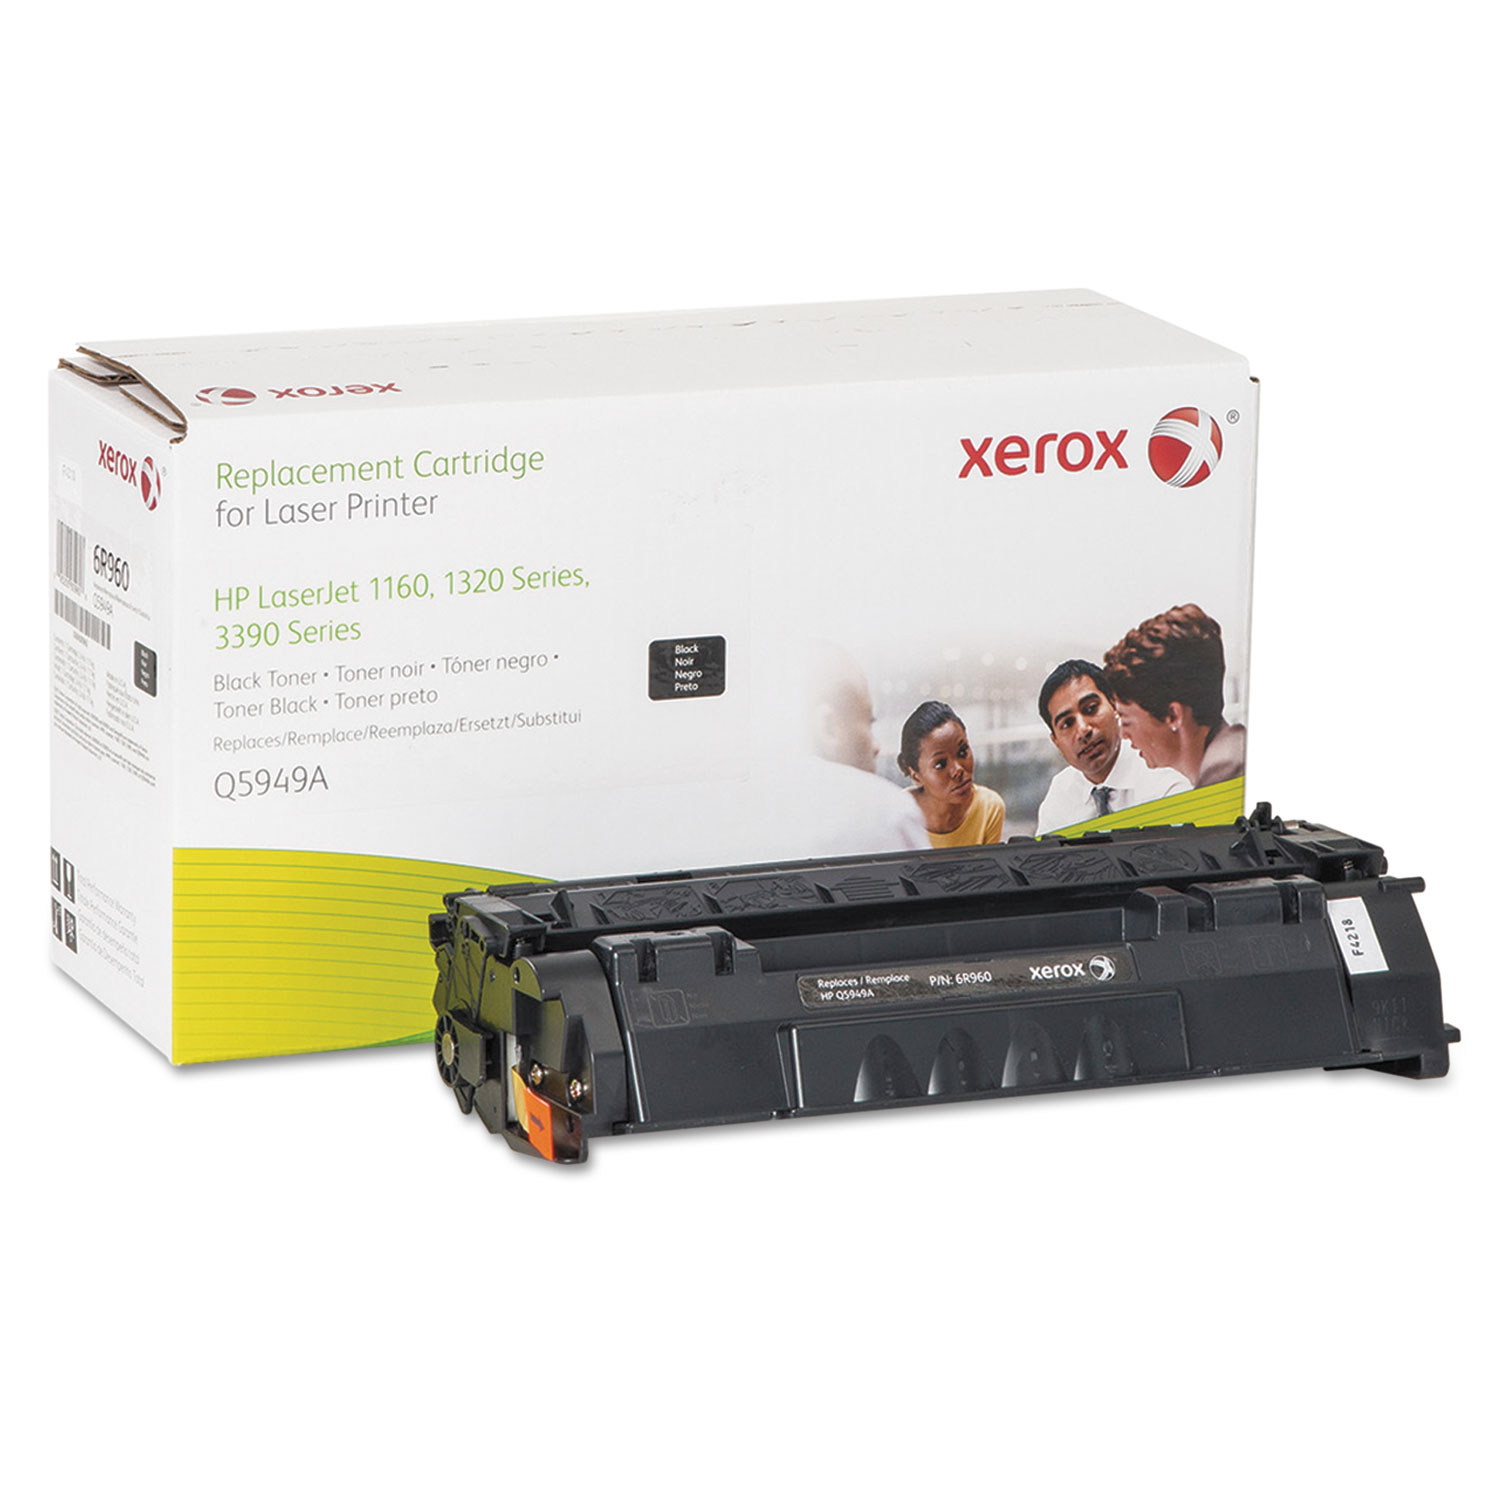  Xerox 006R00960 006R00960 Replacement Toner for Q5949A (49A), Black (XER006R00960) 